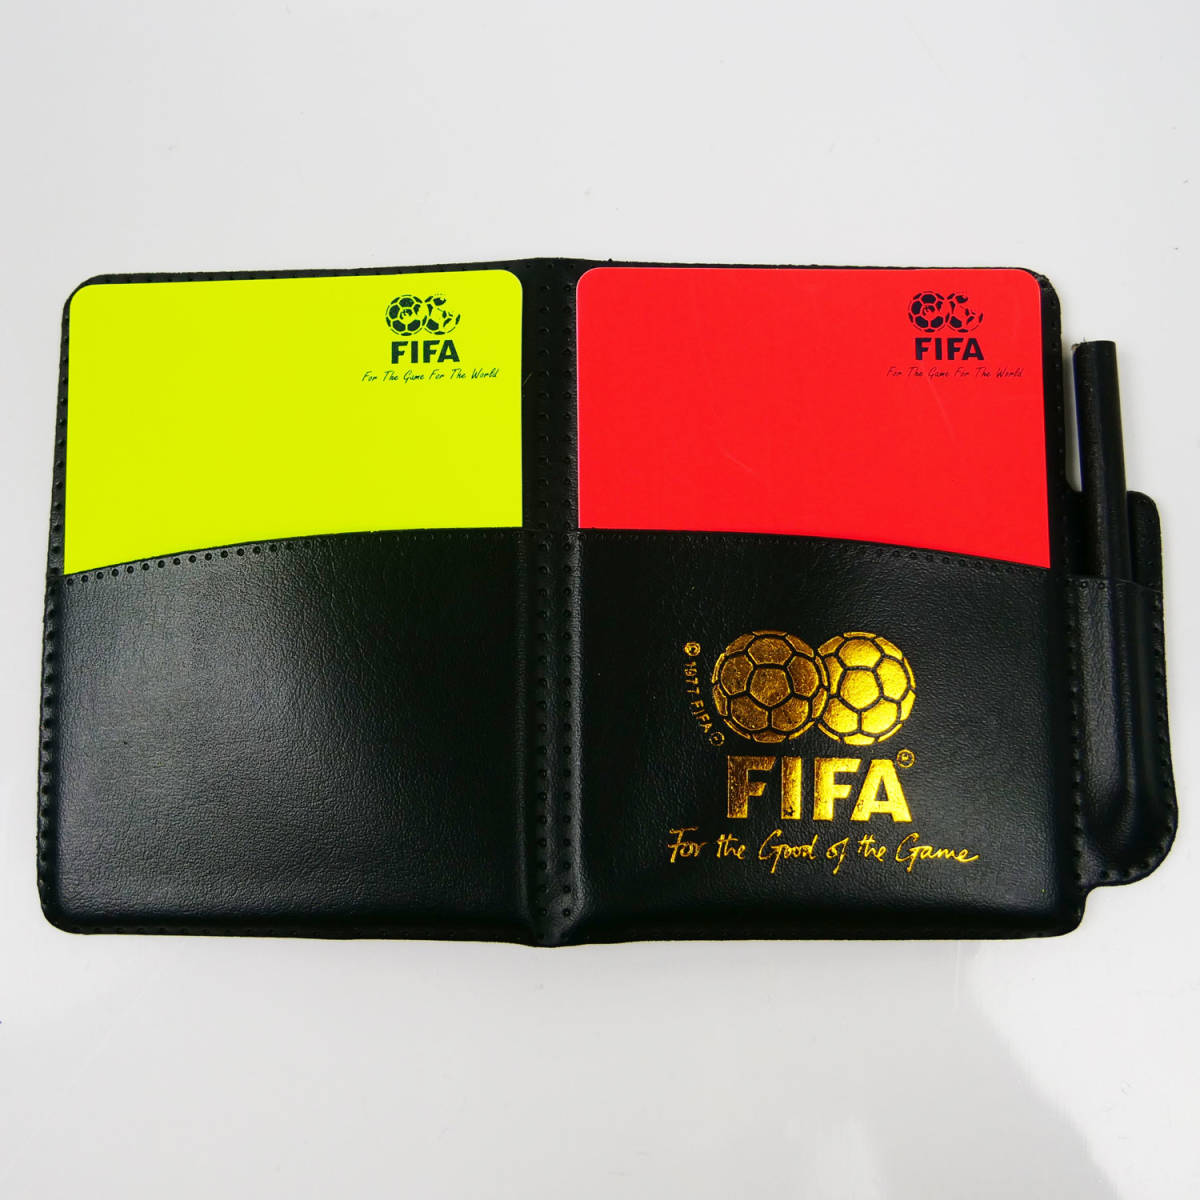  red card yellow card card-case score notebook soccer futsal supplies for referee ..re free referee referee notebook FIFA